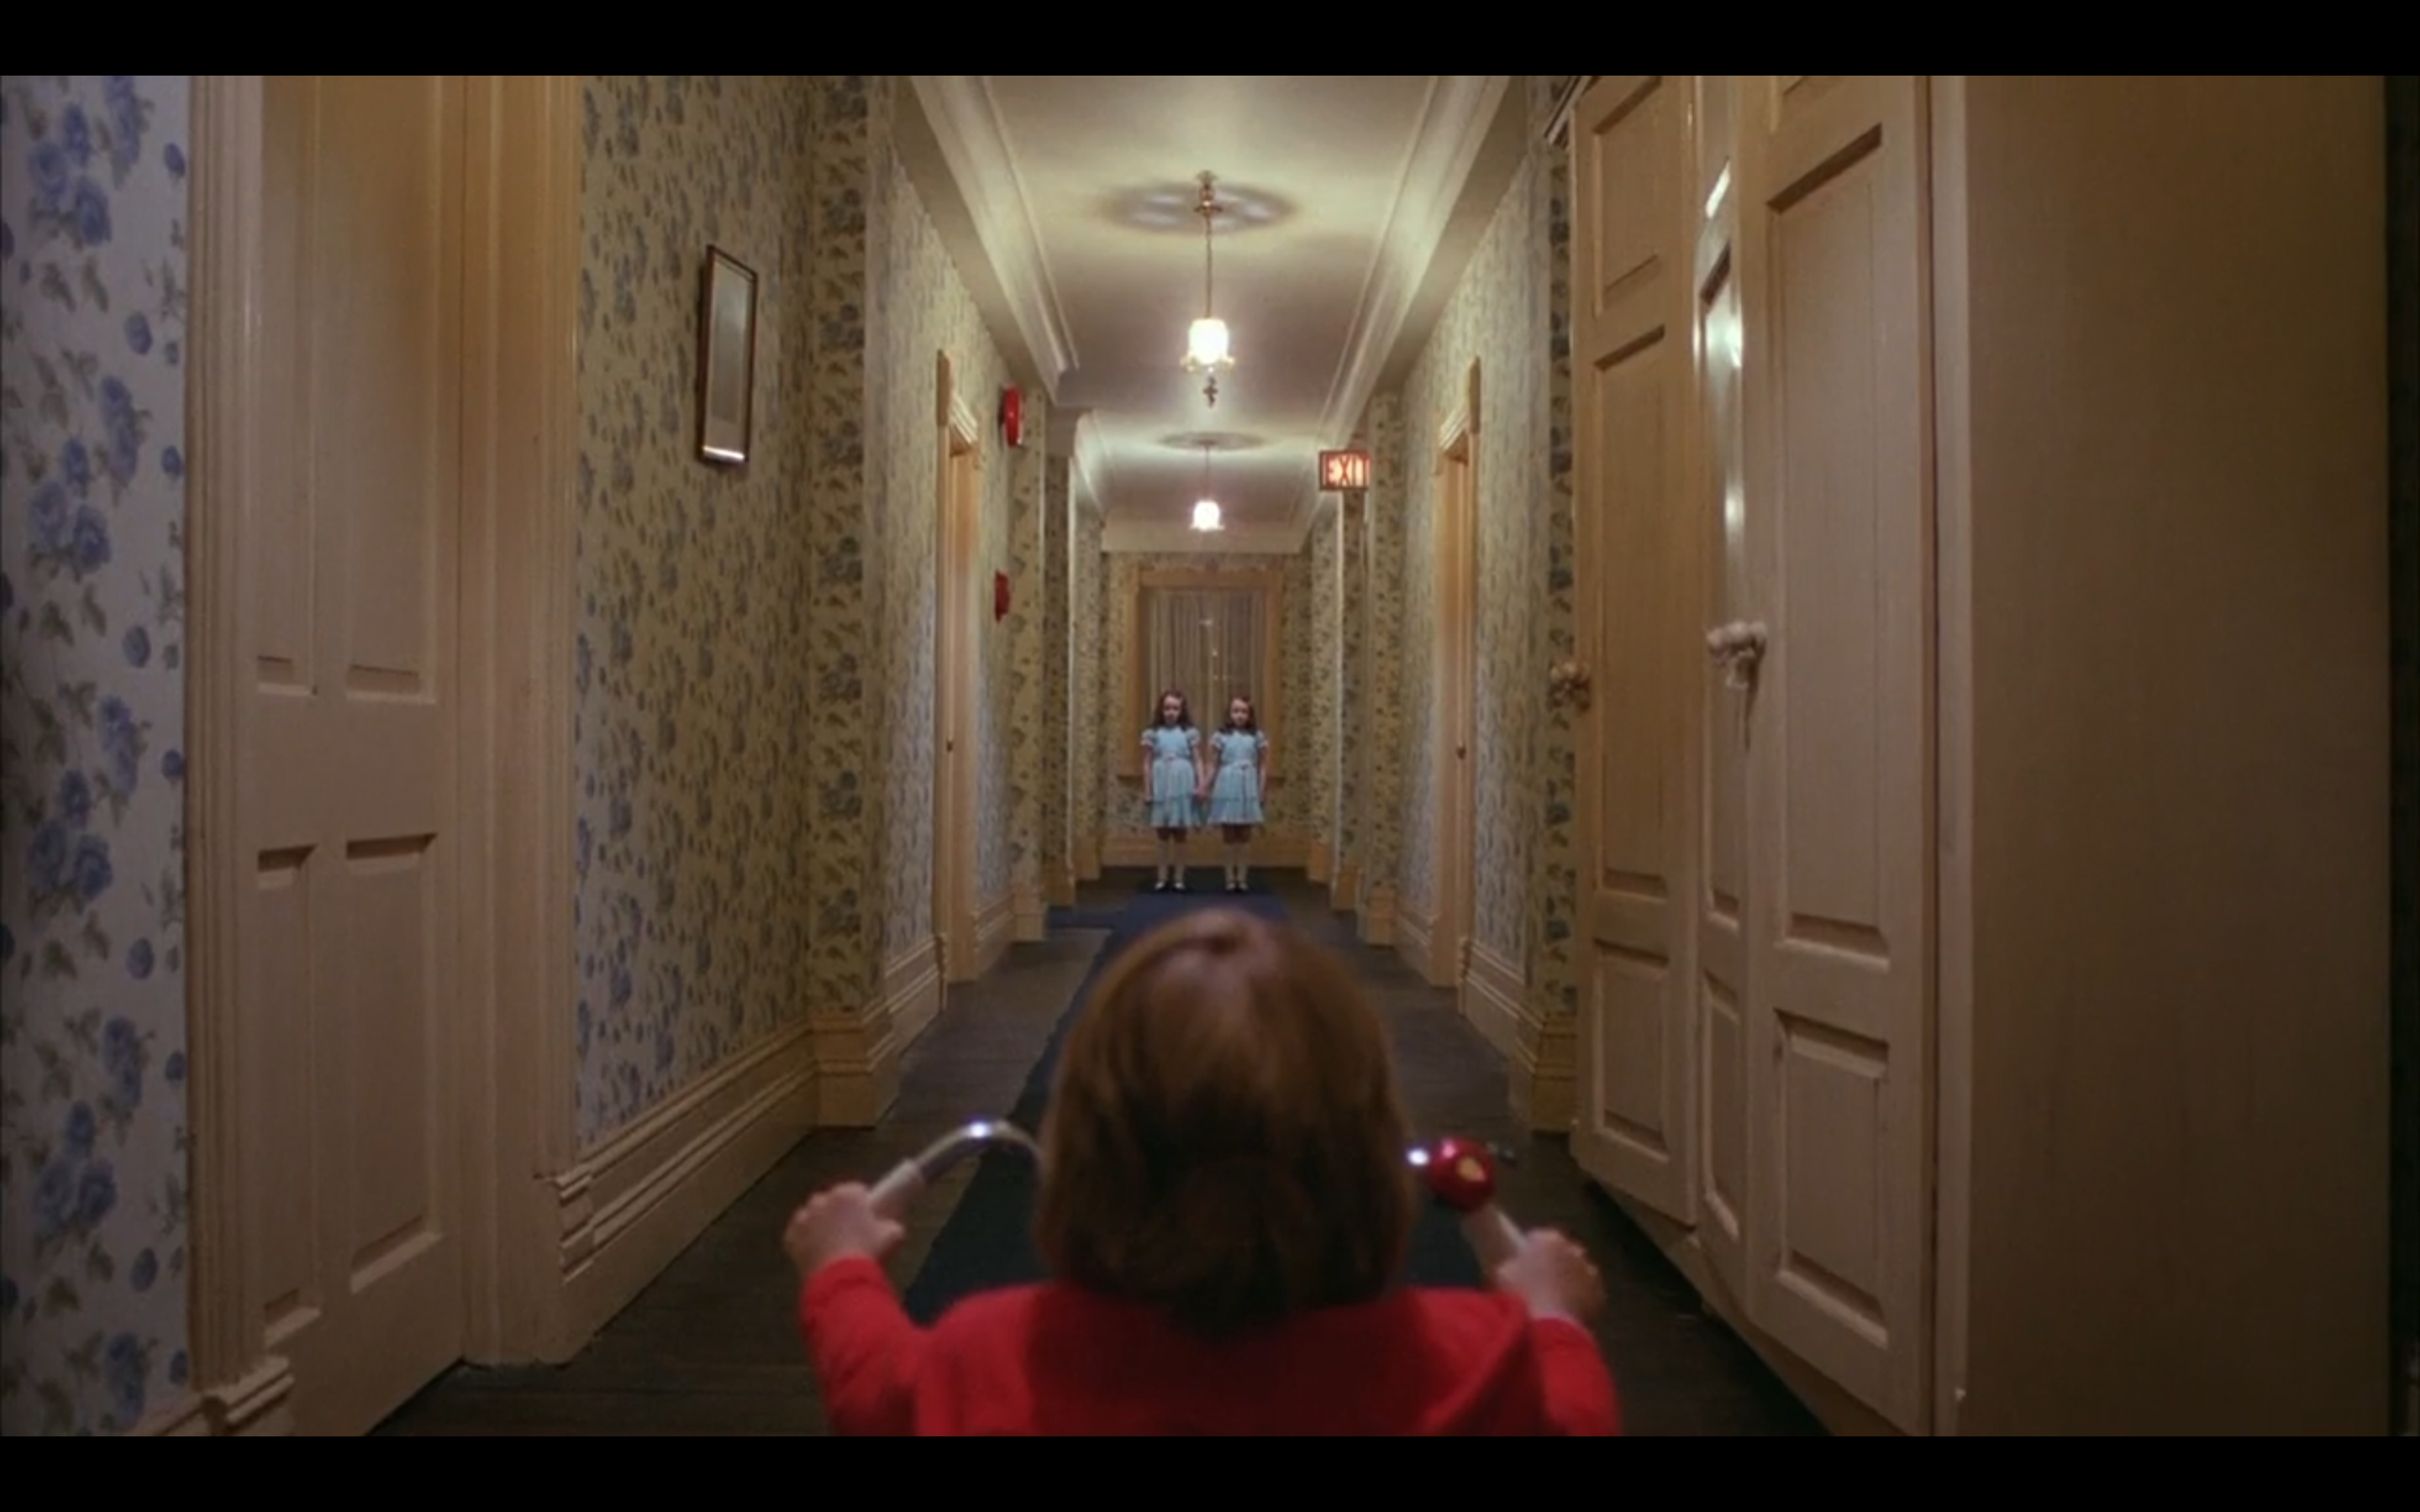 Danny Torrance sees disturbing visions while exploring the Overlook Hotel.